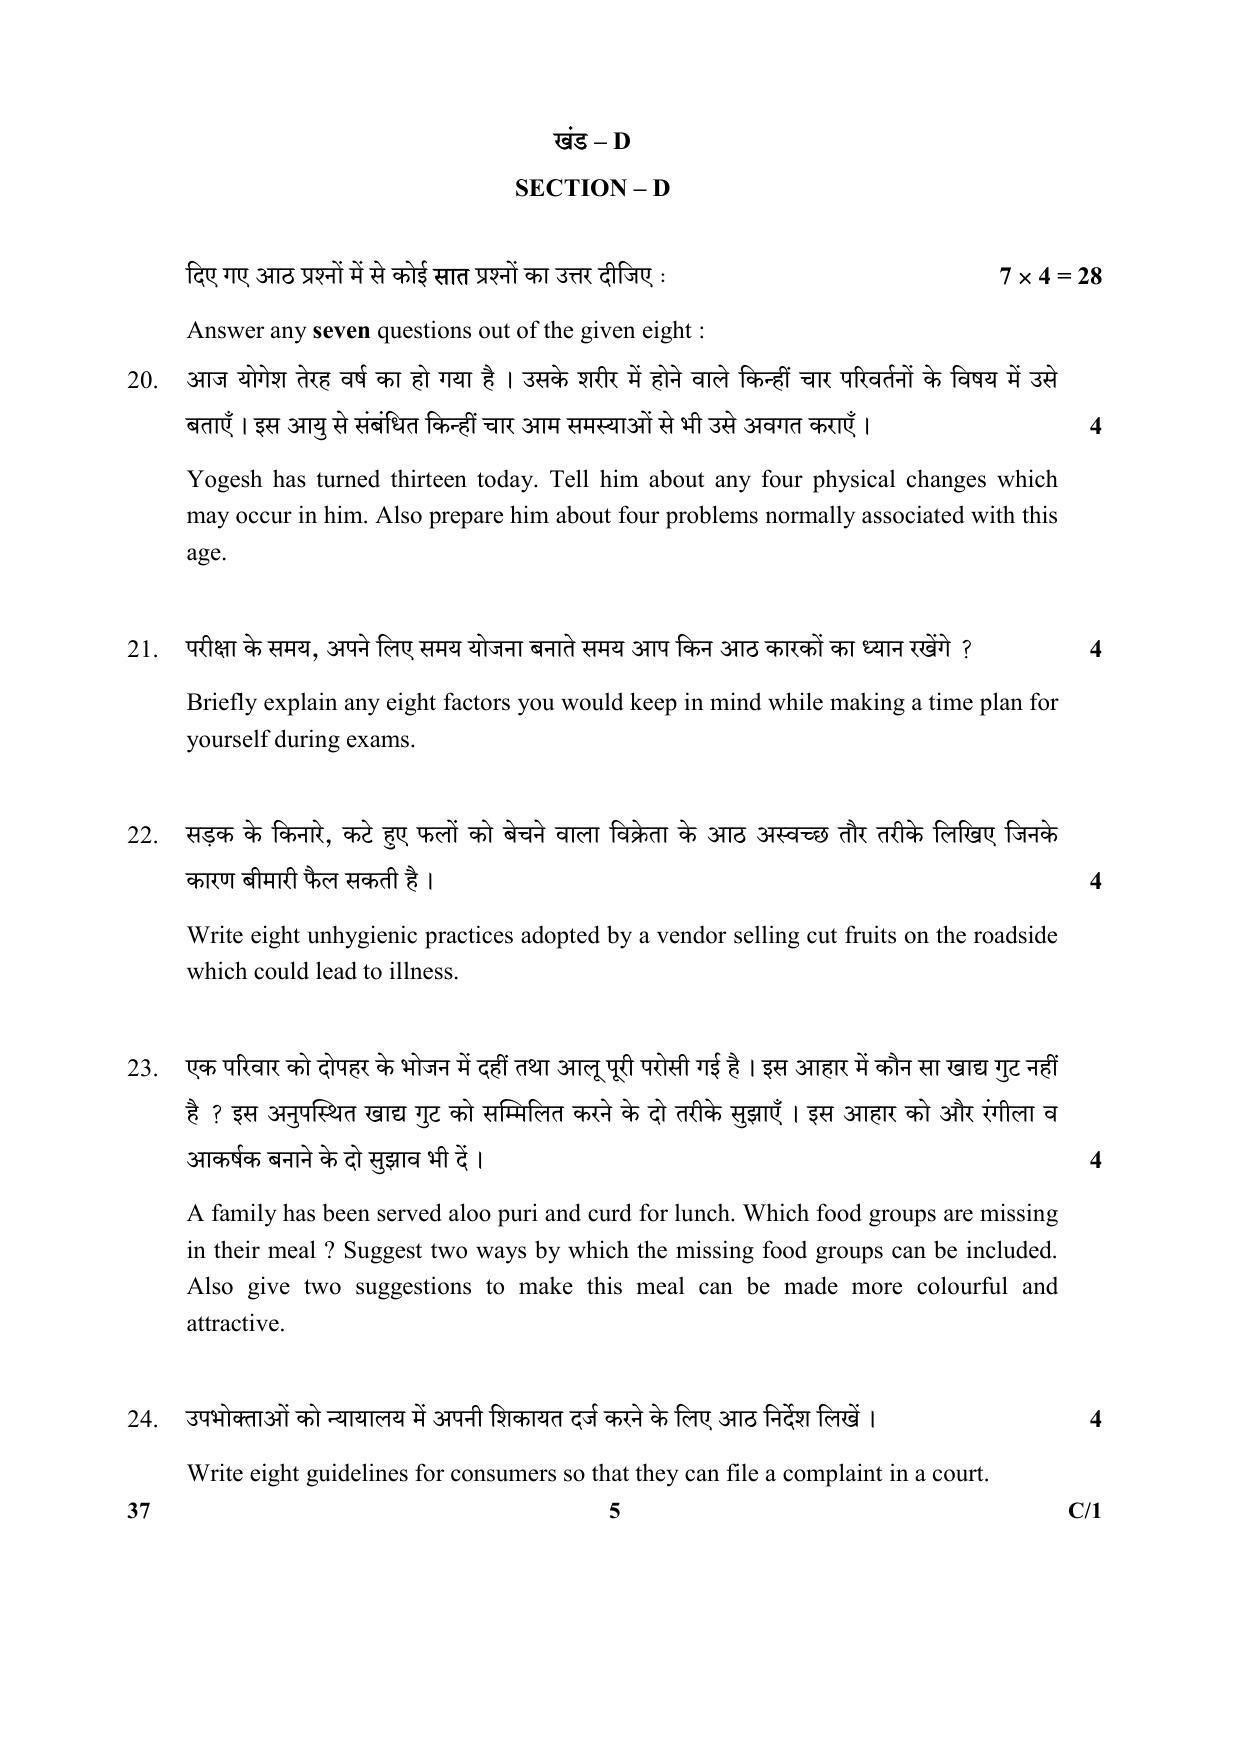 CBSE Class 10 37 (Home Science) 2018 Compartment Question Paper - Page 5